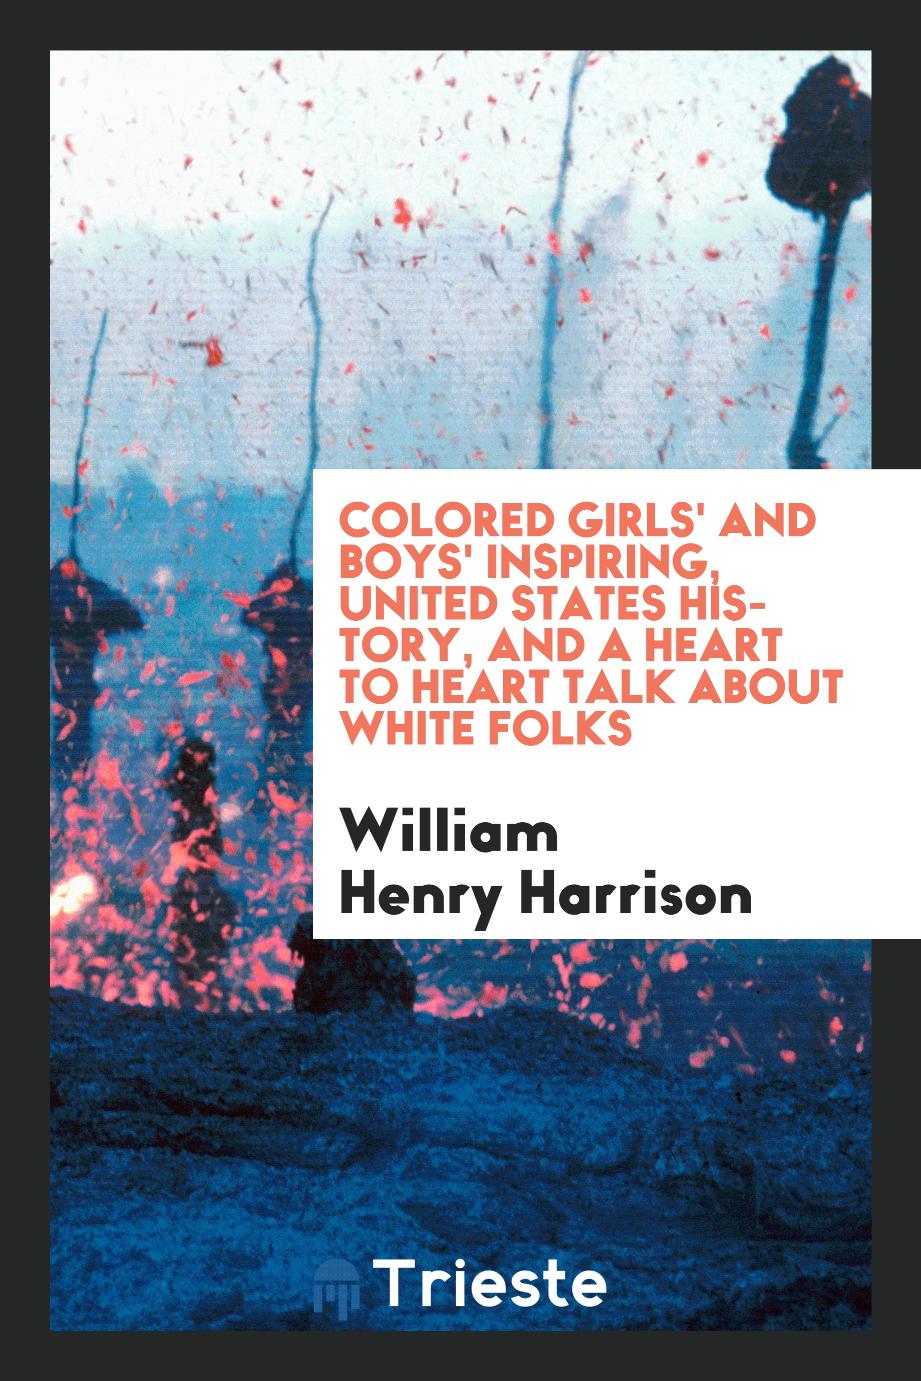 Colored girls' and boys' inspiring, United States history, and a heart to heart talk about white folks